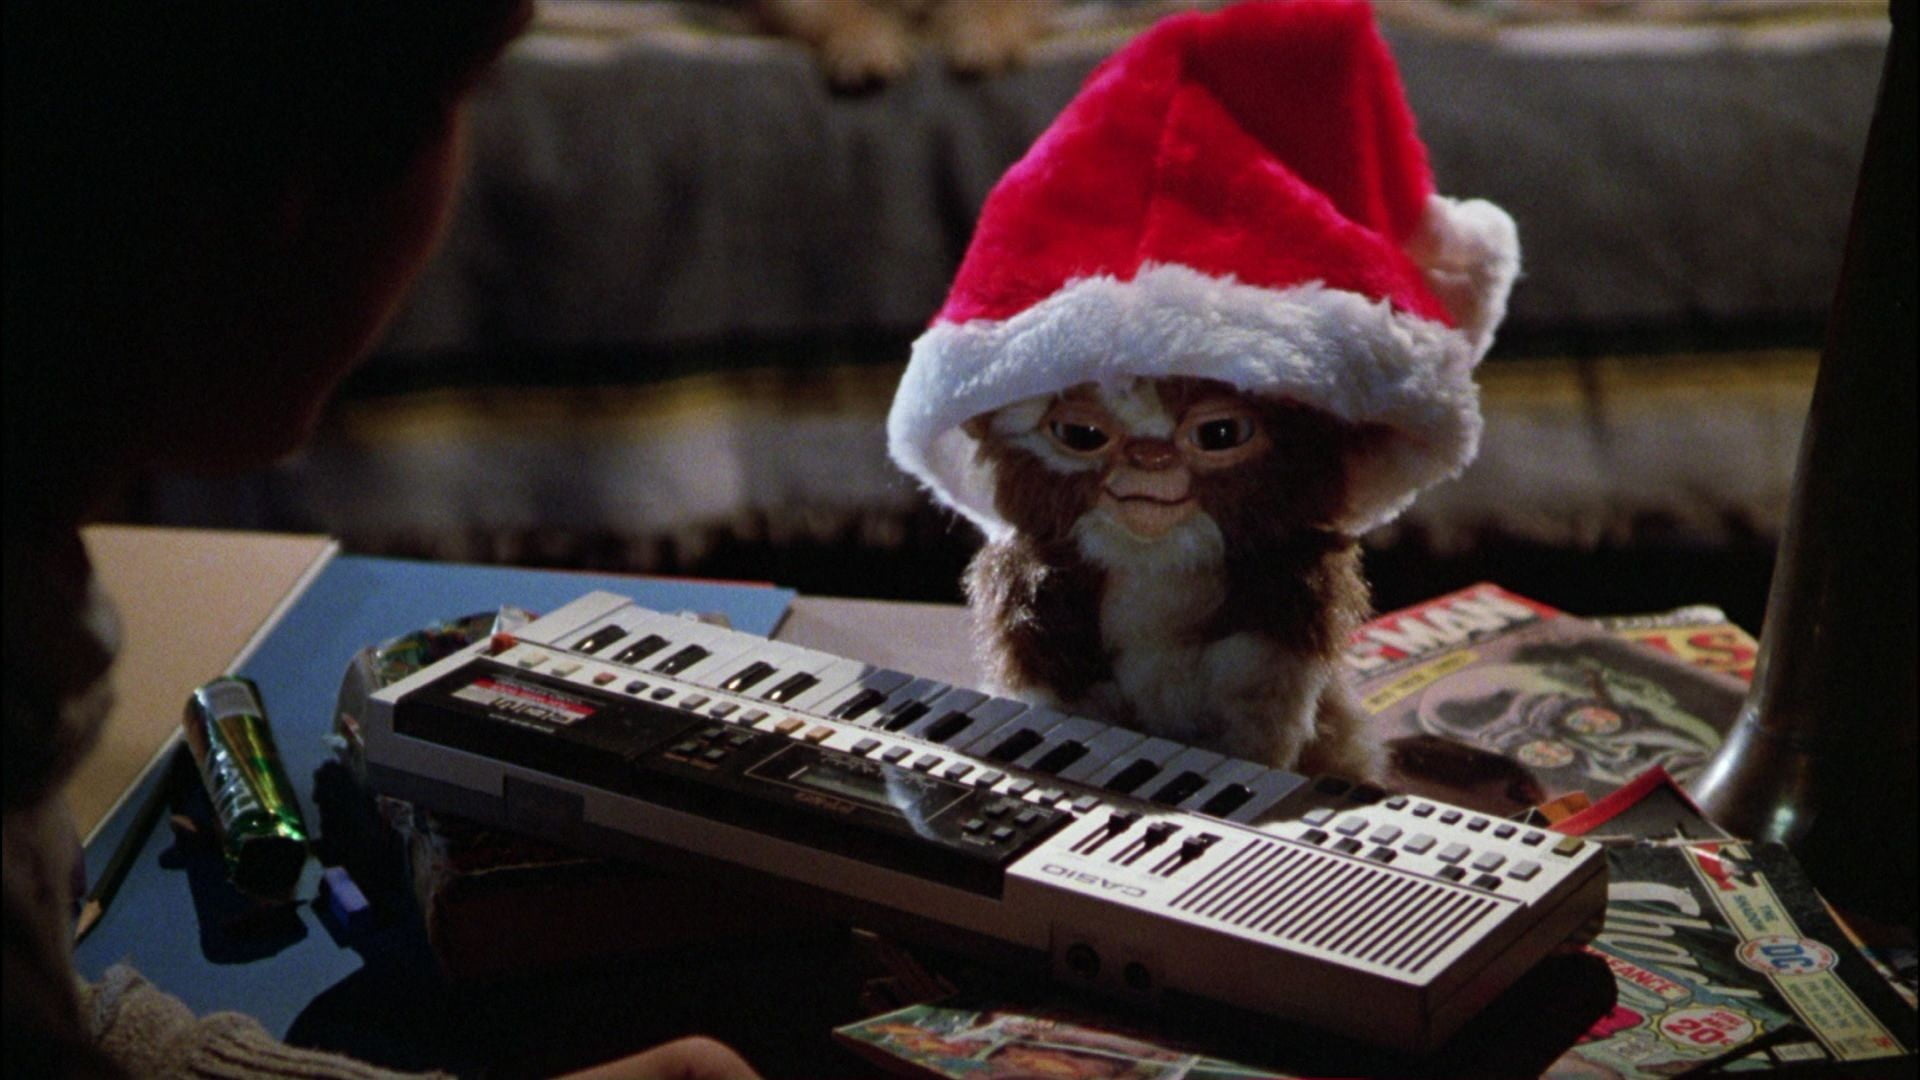 Gremlin: A sequel, The New Batch, was released in 1990, Gizmo. 1920x1080 Full HD Background.